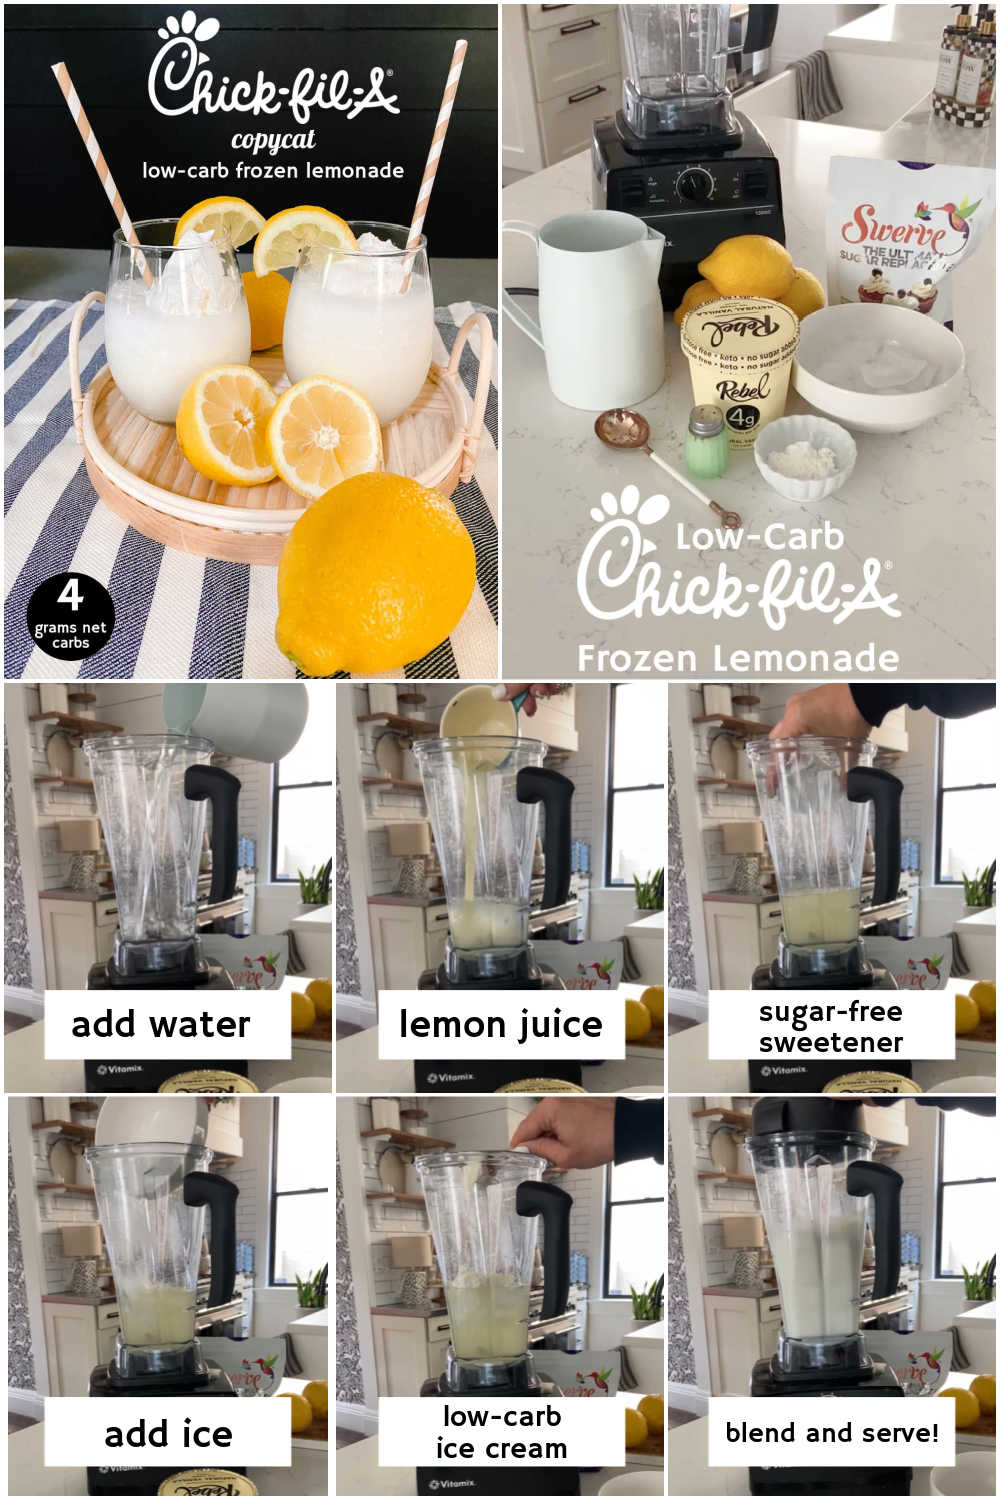 Chick-fil-A KETO low-carb frozen lemonade. Only FIVE ingredients and 4 grams NET carbs per serving!